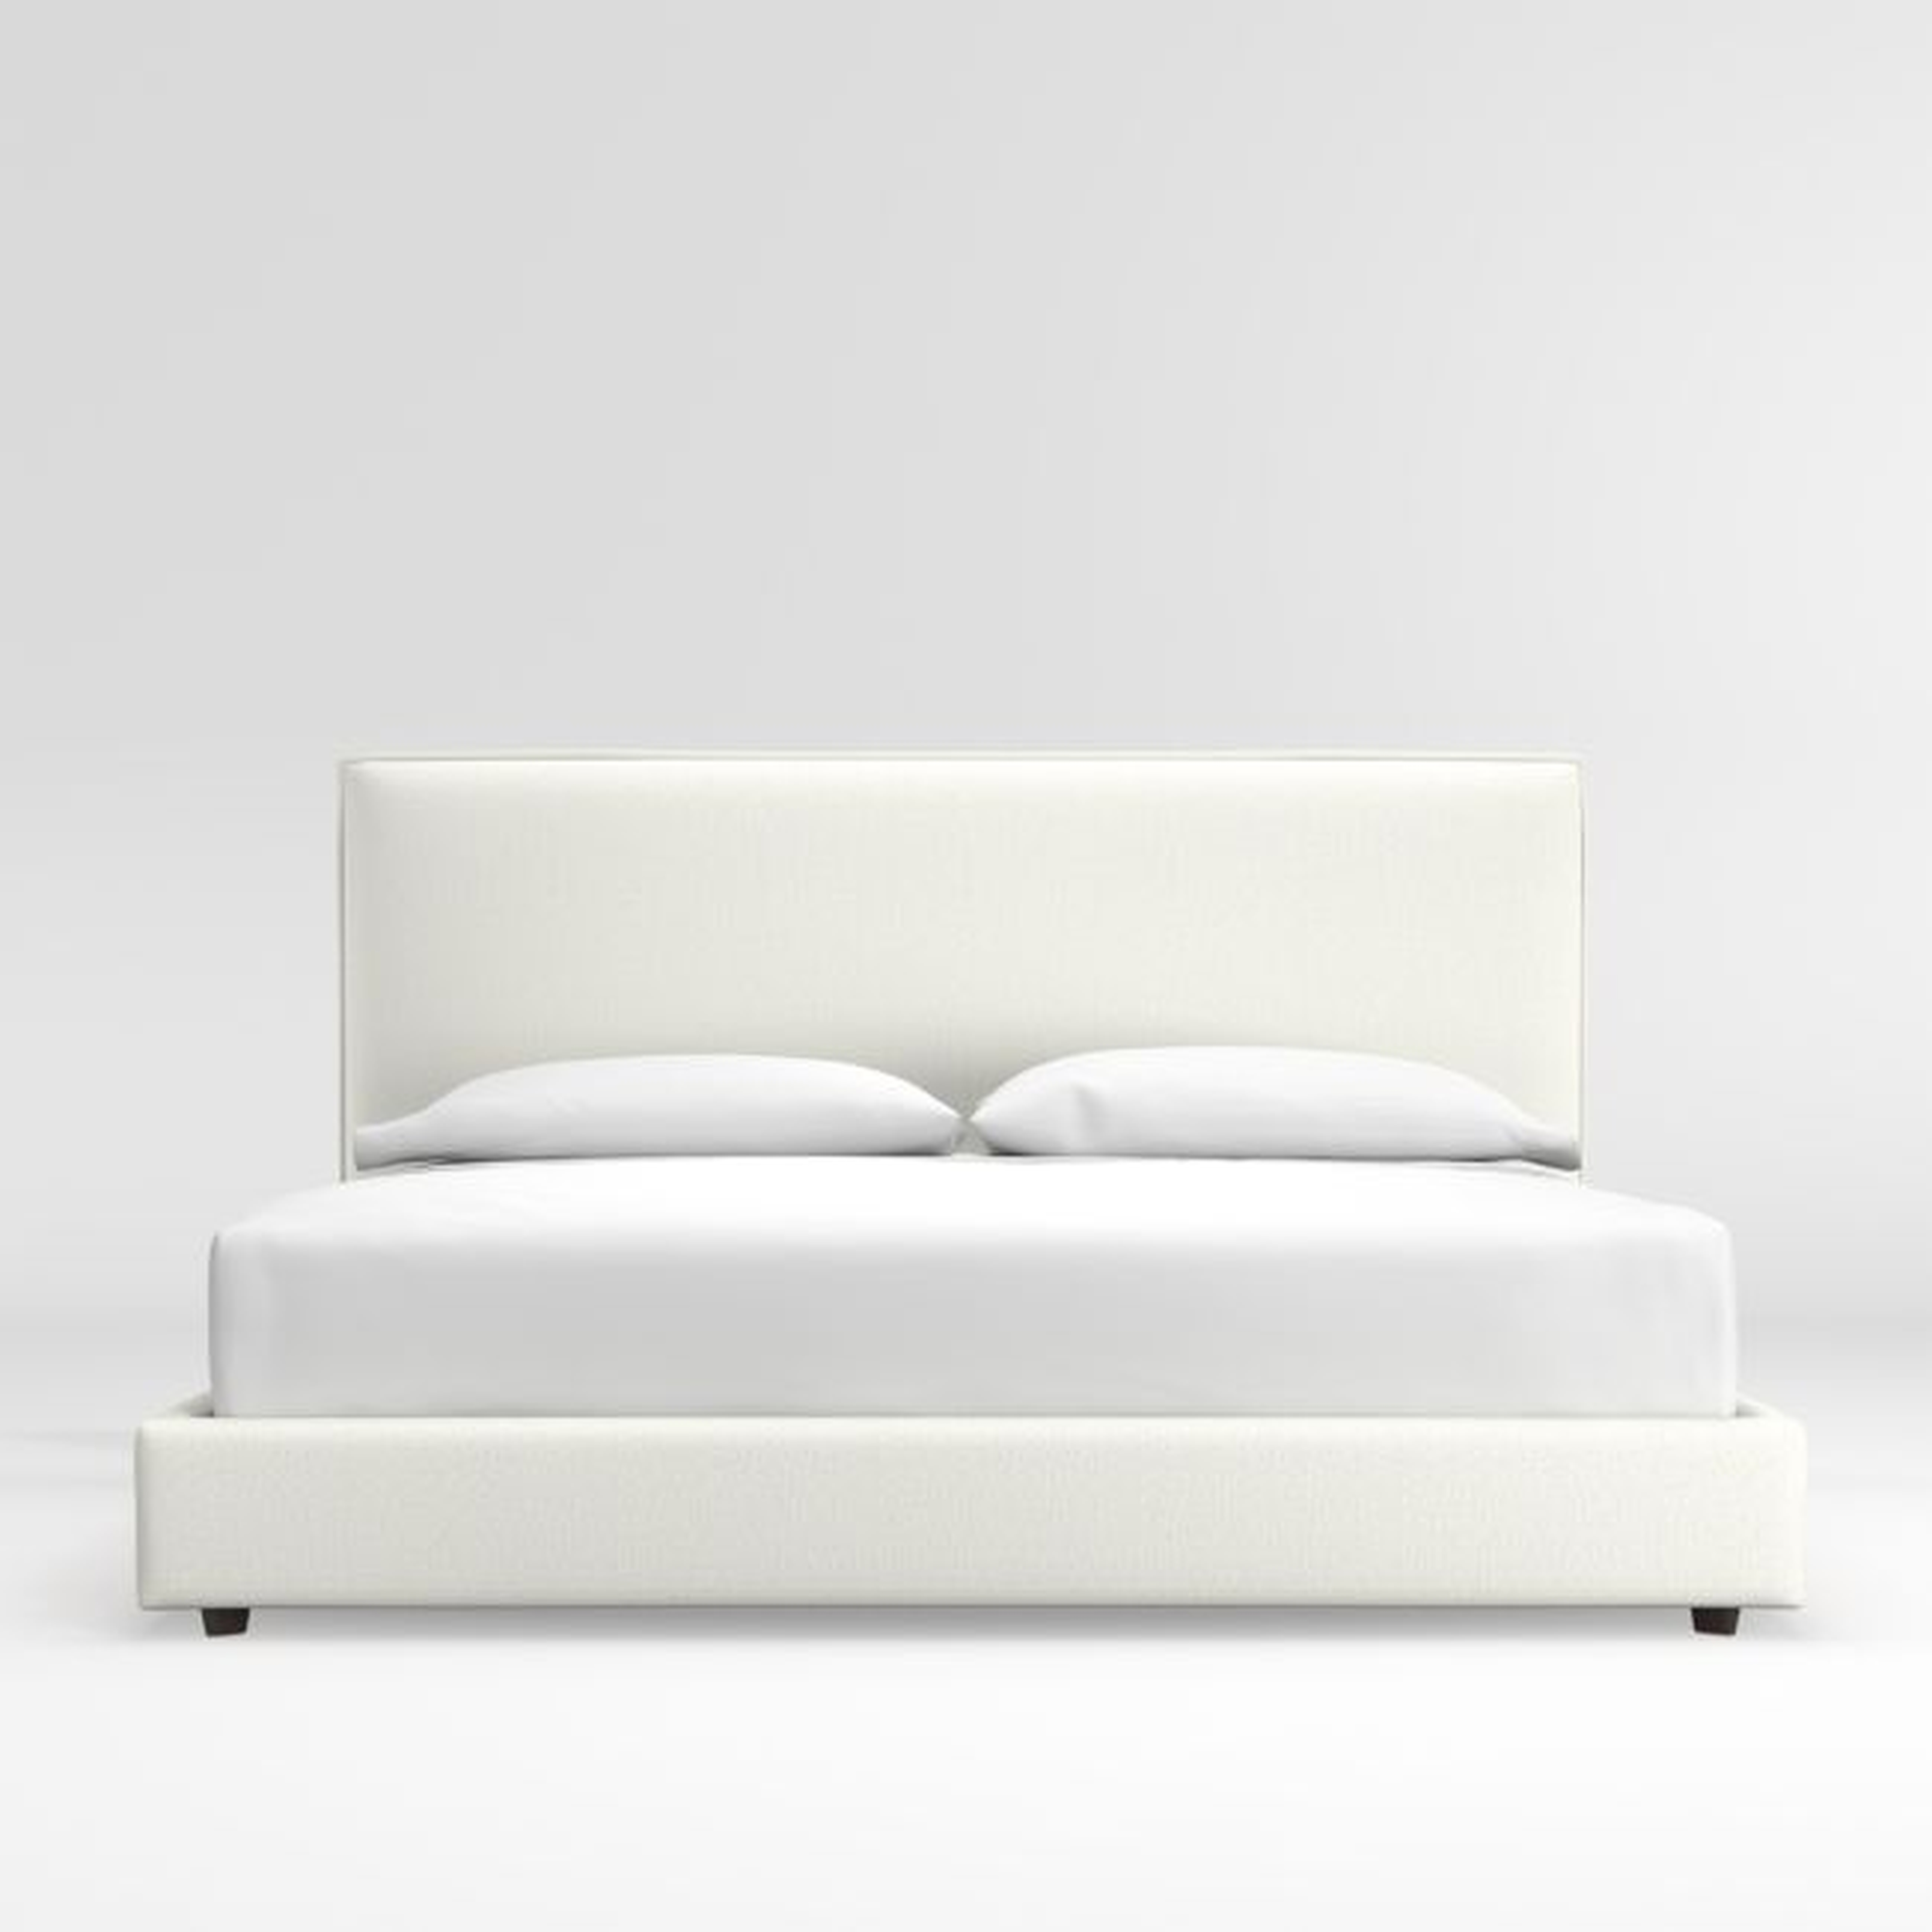 Lotus Upholstered California King Bed with 41" Headboard - Crate and Barrel